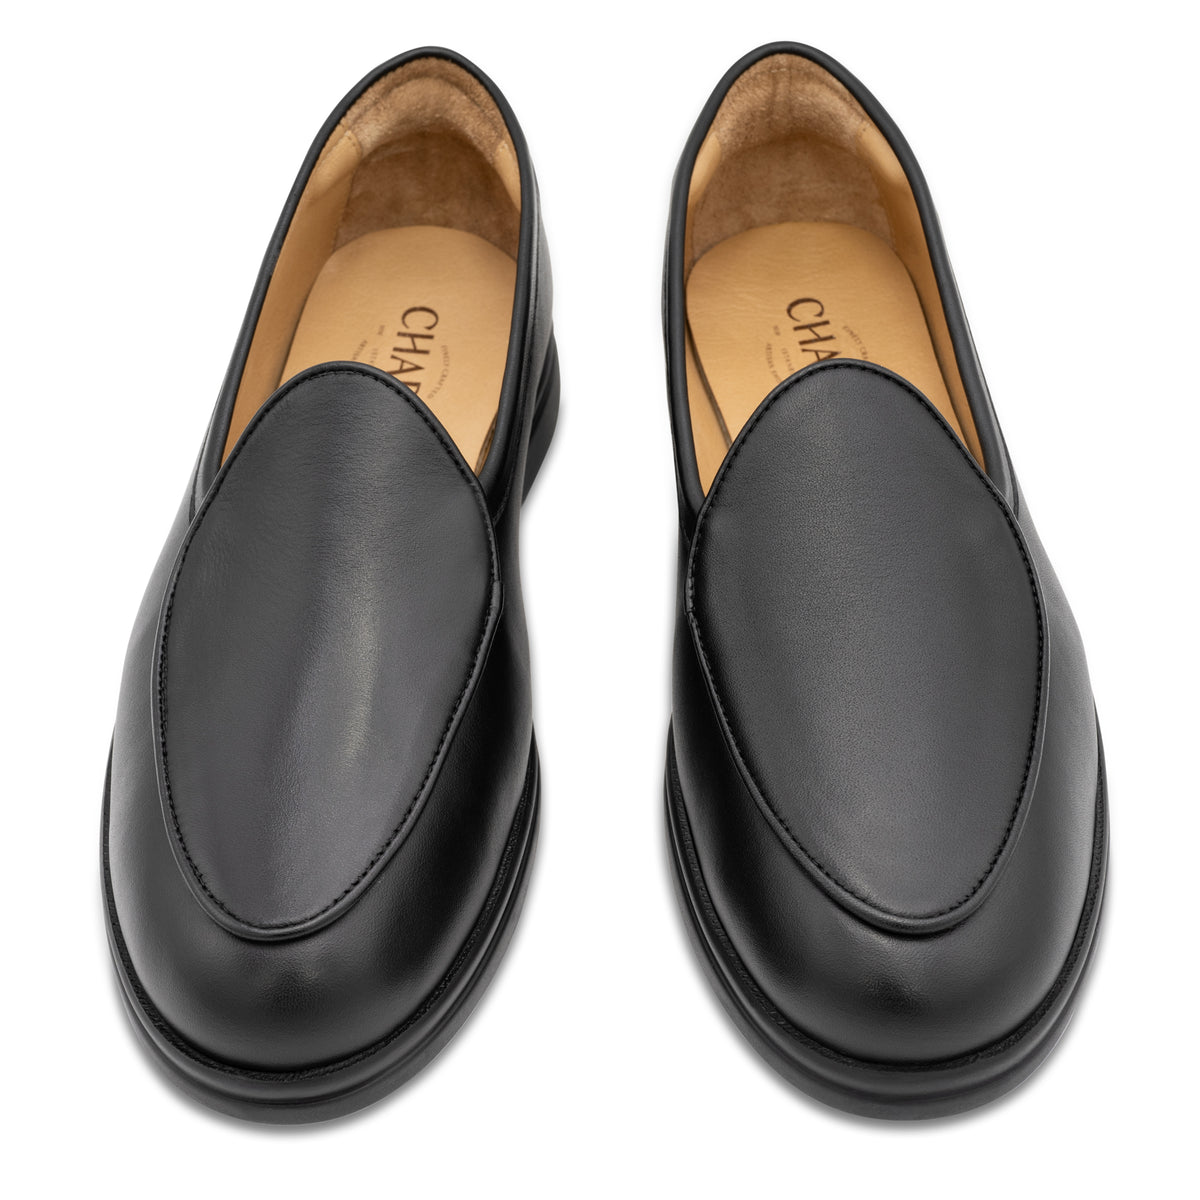 Black Loafers - Charix Shoes